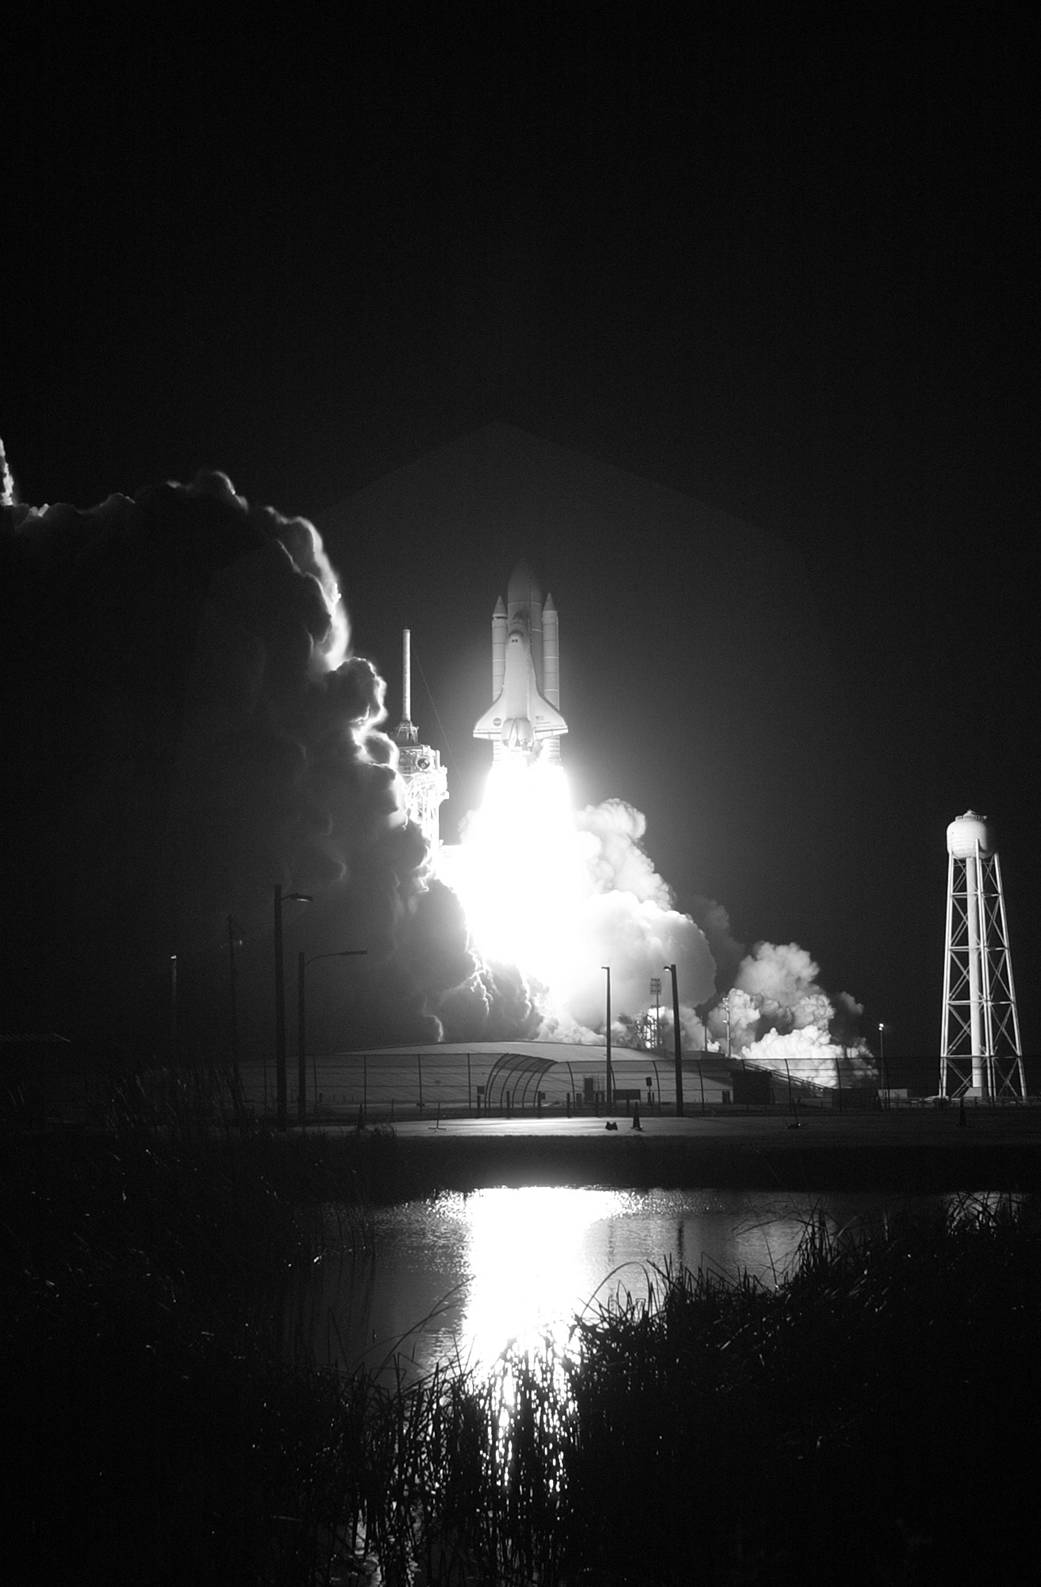 Black and white image of nighttime space shuttle launch